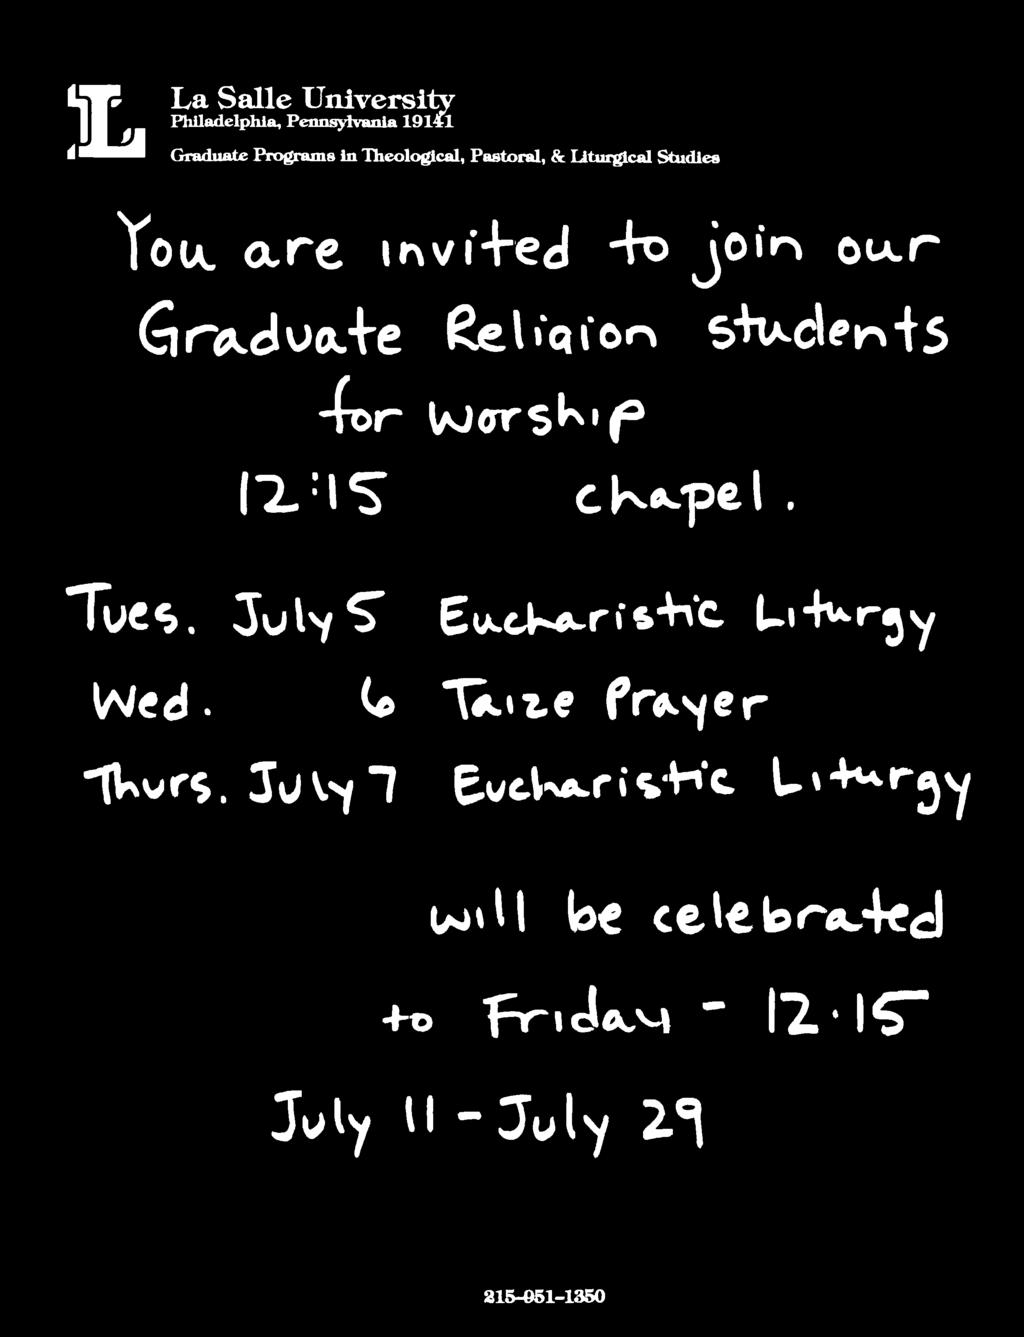 L La Salle University Philadelphia, Pennsylvania 19141 Graduate Programs in Theological, Pastoral, & liturgical Studies You are invited to join our Graduate Religion students for worship 12:15